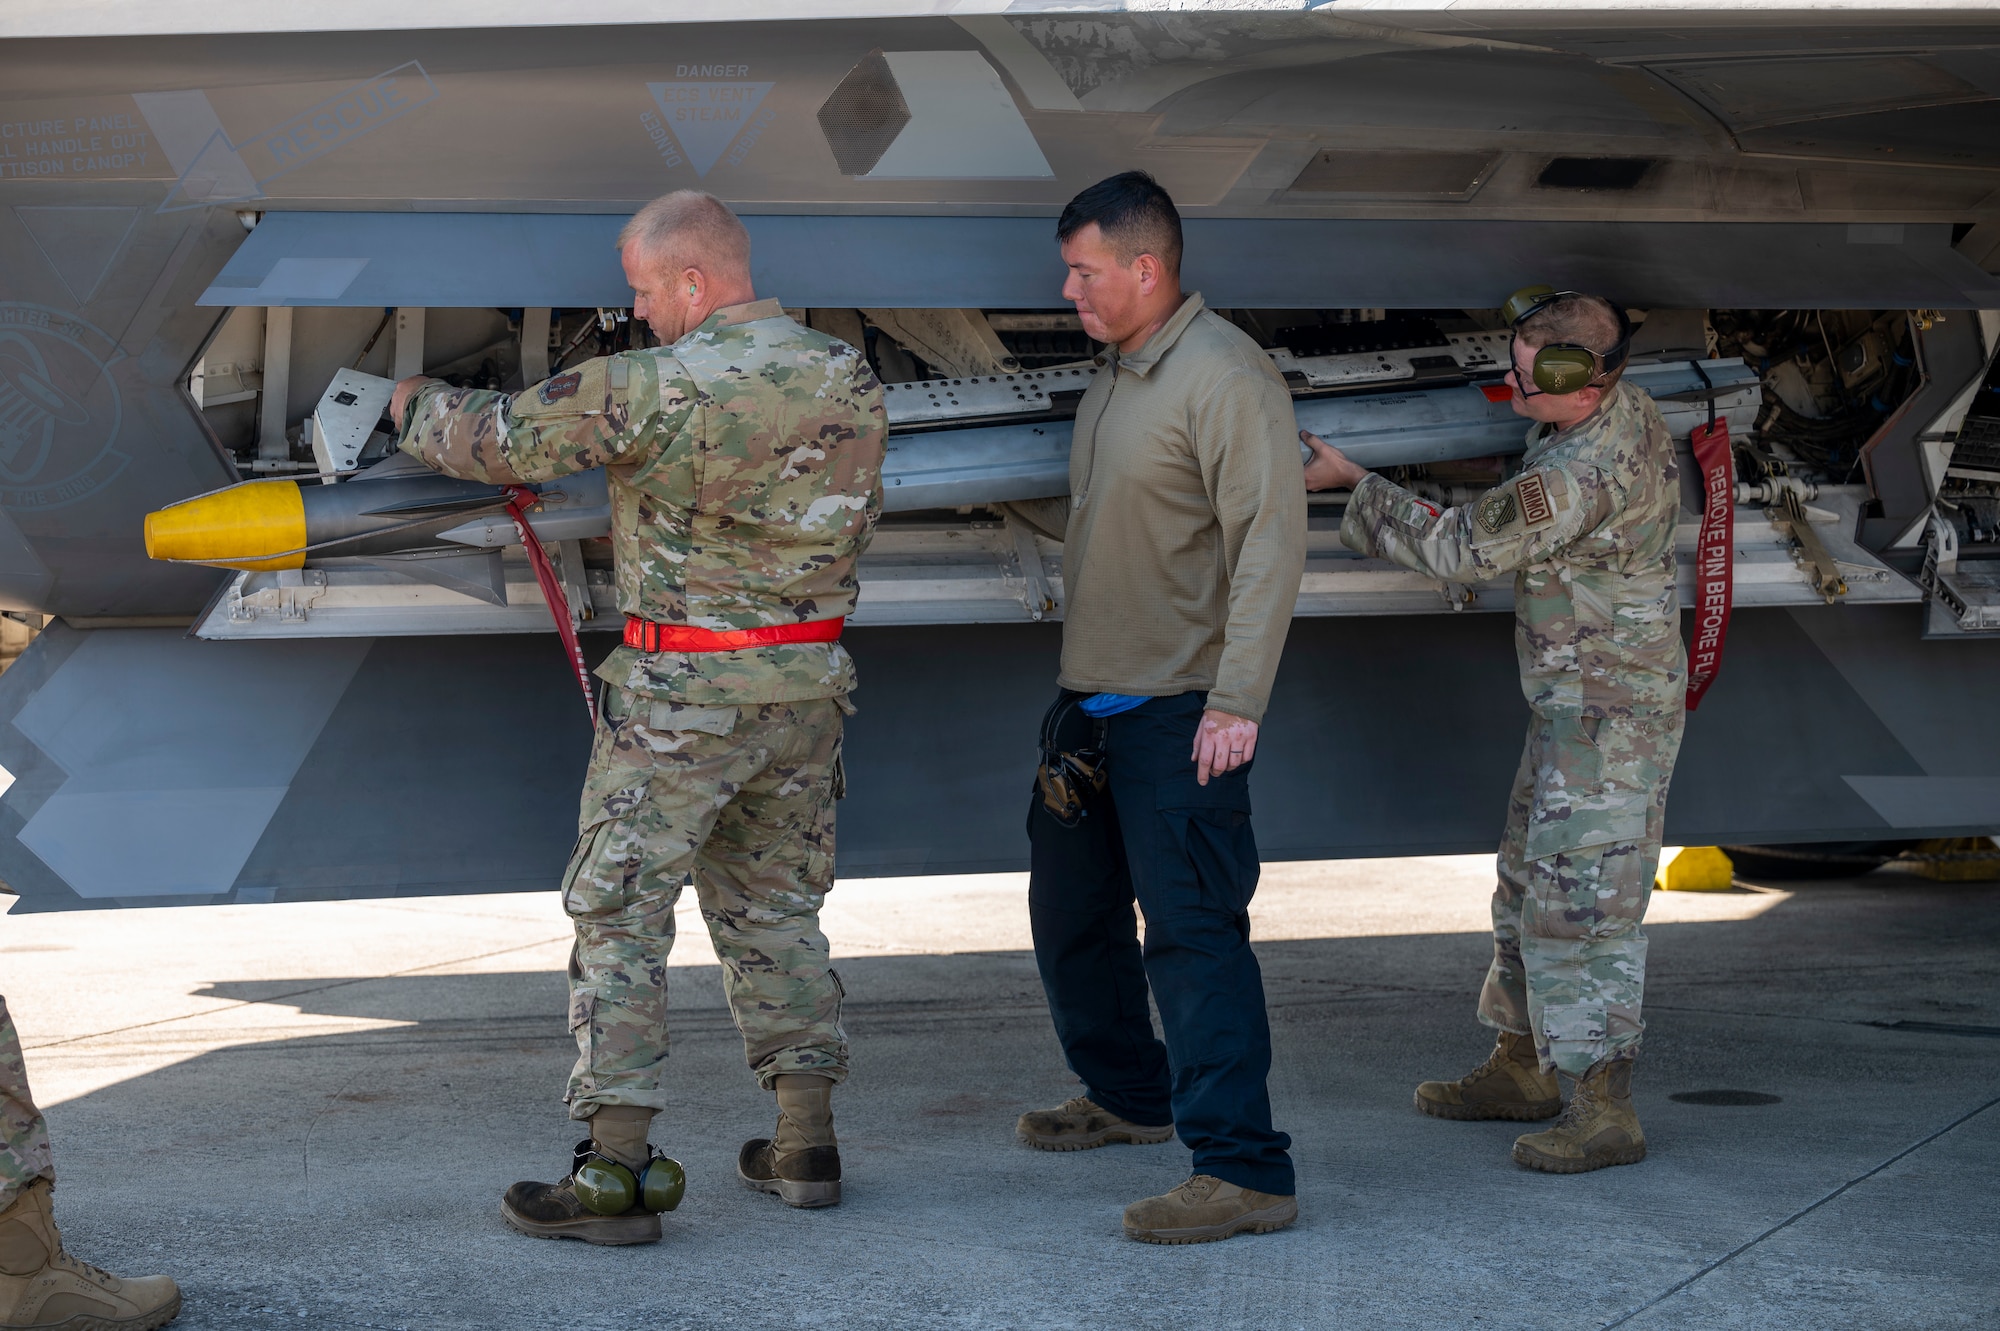 Airmen unload a missile from an aircraft